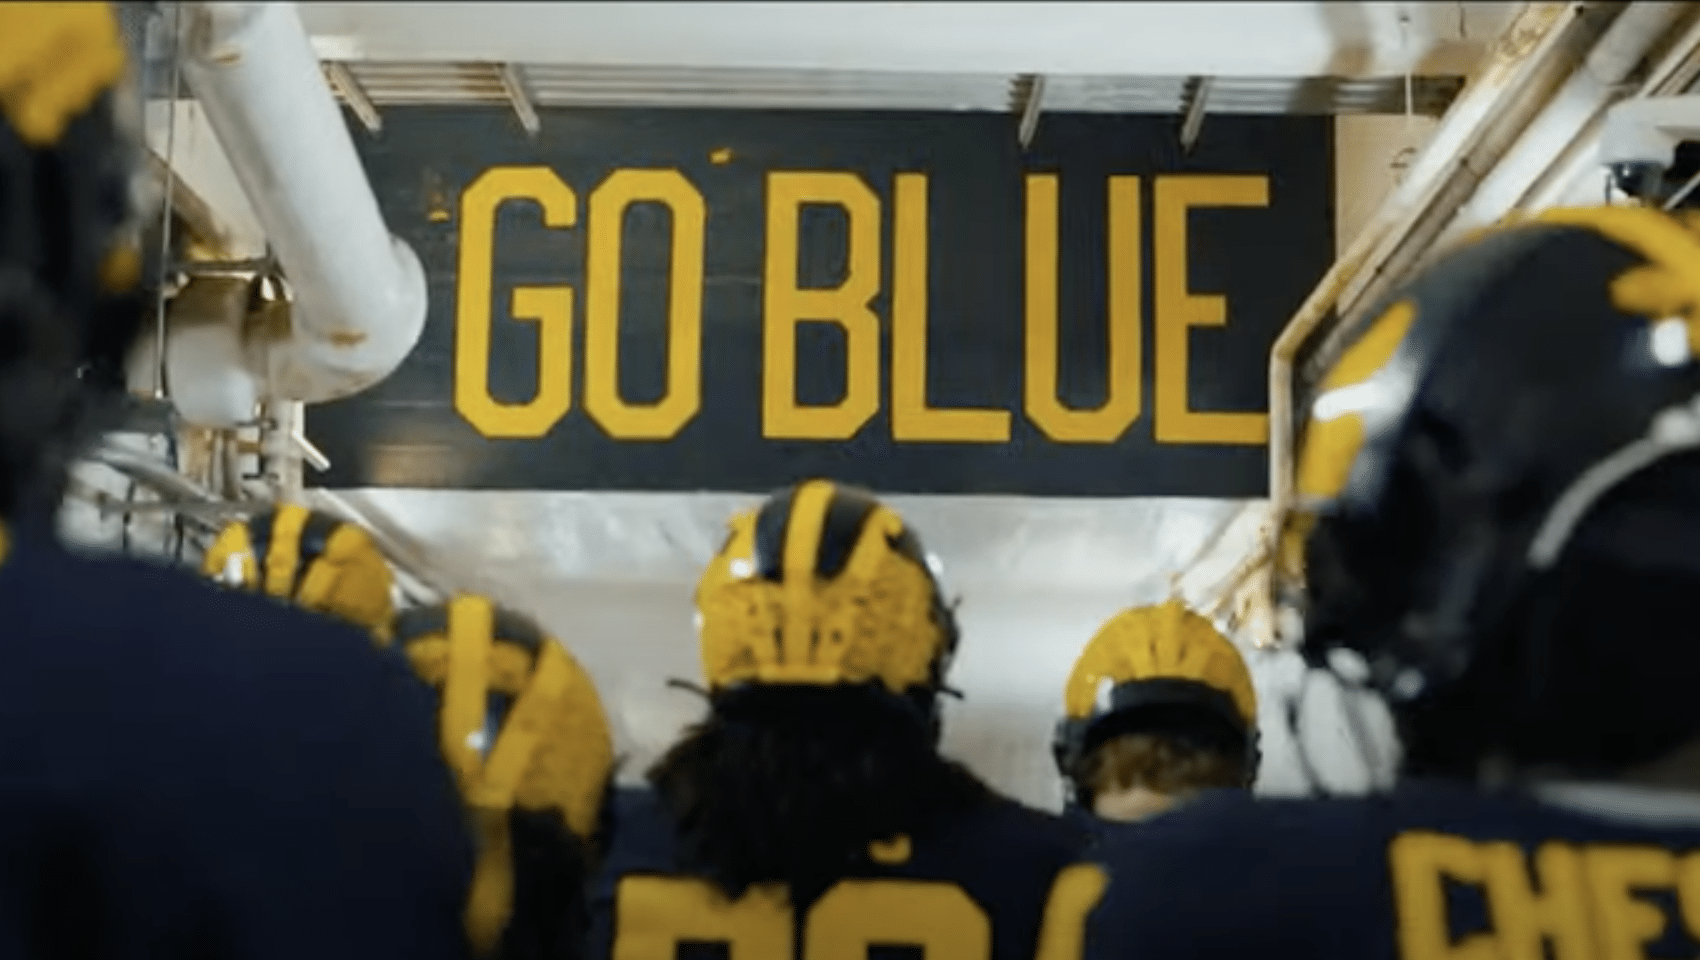 Michigan vs. Penn State Hype Video Michigan Football Injury Report Michigan Football announces MVP Michigan Football drops EPIC CFP Championship Game Hype Video NCAA President weighs in on fairness of Michigan Michigan Football safety